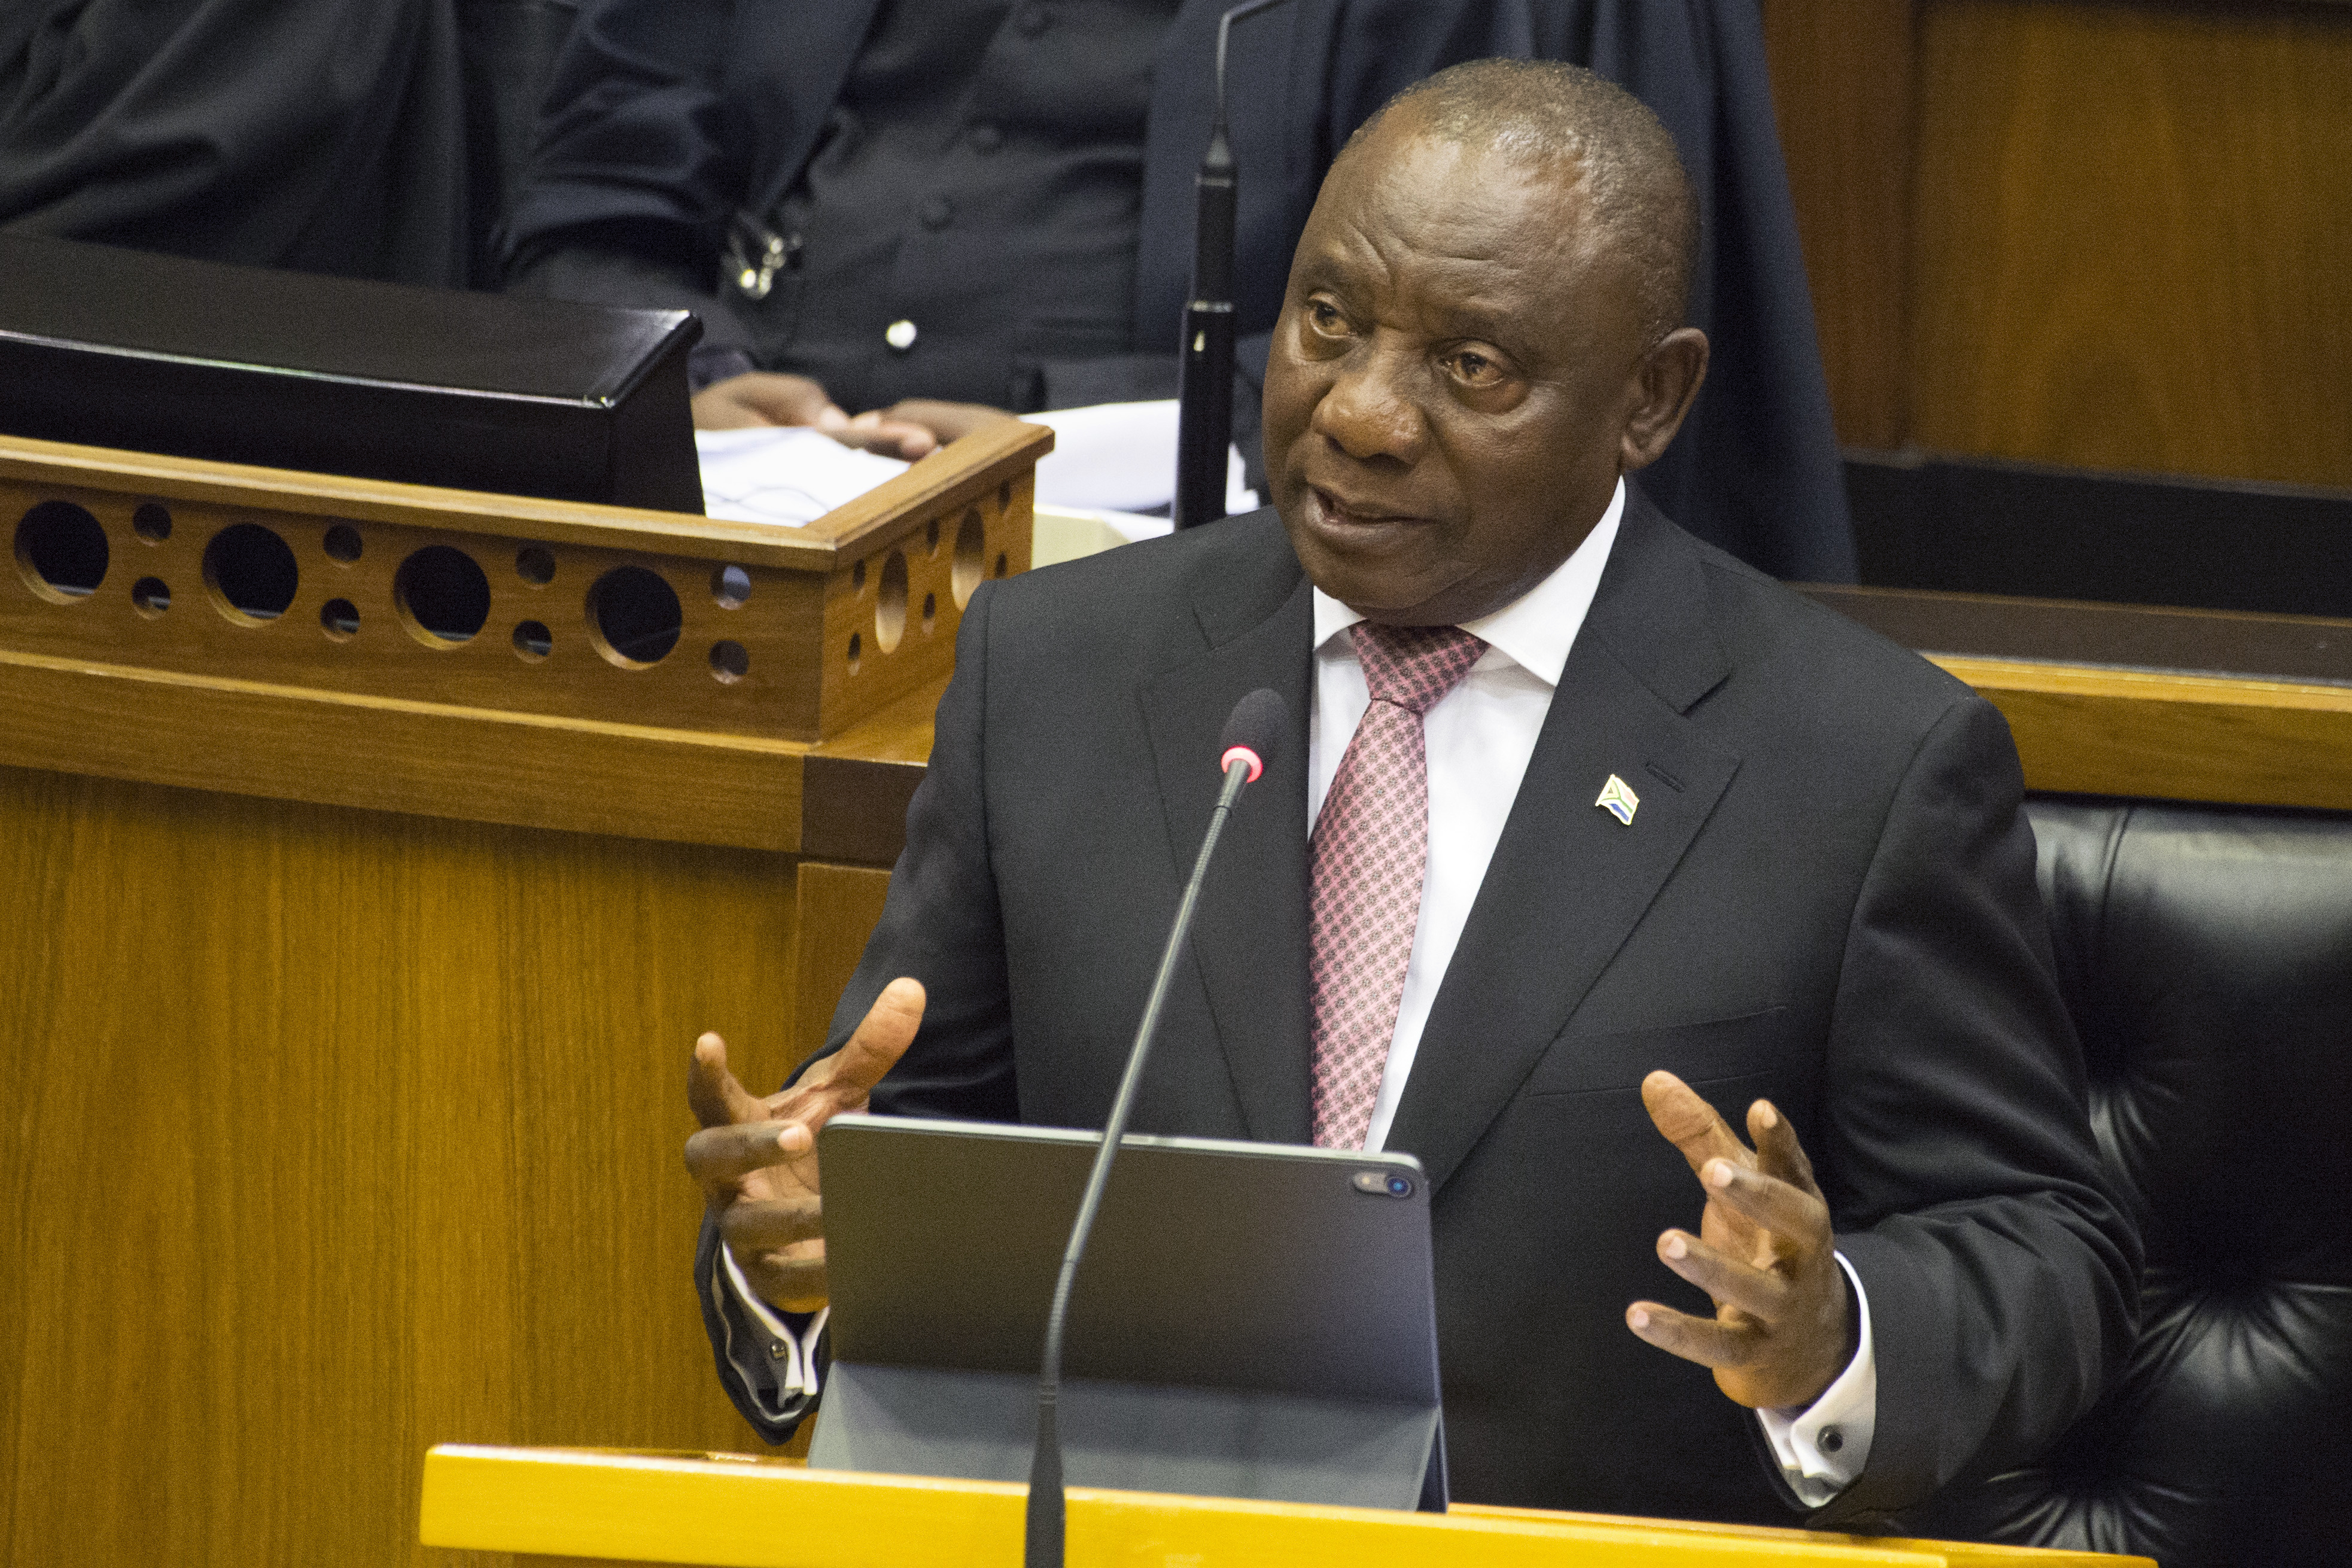 South Africa: The five labors of Cyril Ramaphosa